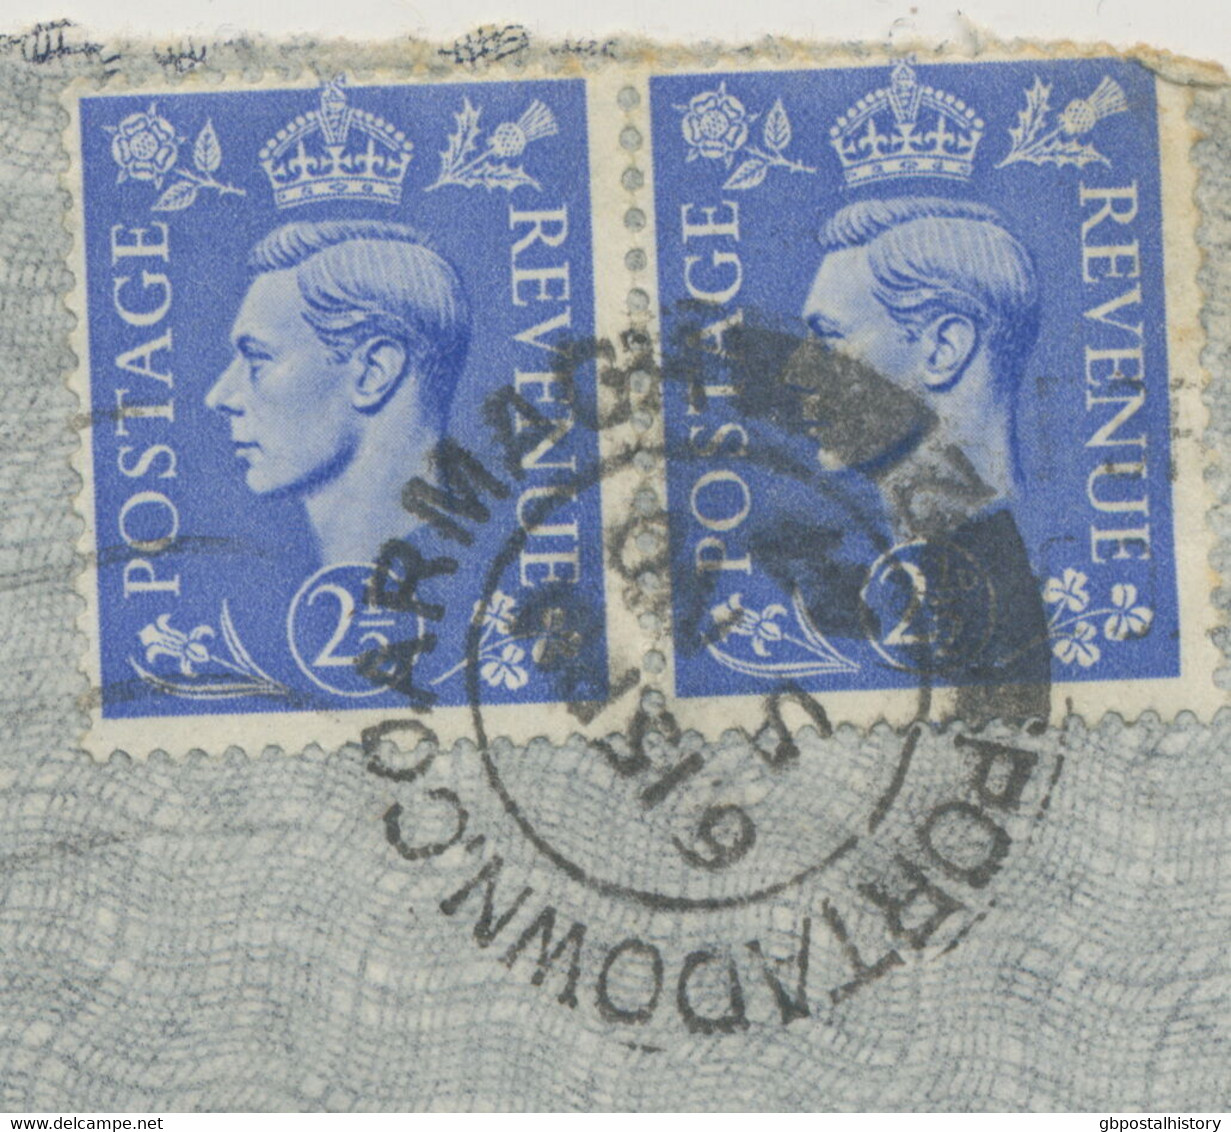 GB „PORTADOWN.CO.ARMAGH / 2“ Double Ring (25 Mm) Airmail Cover To Switzerland - Irlanda Del Norte